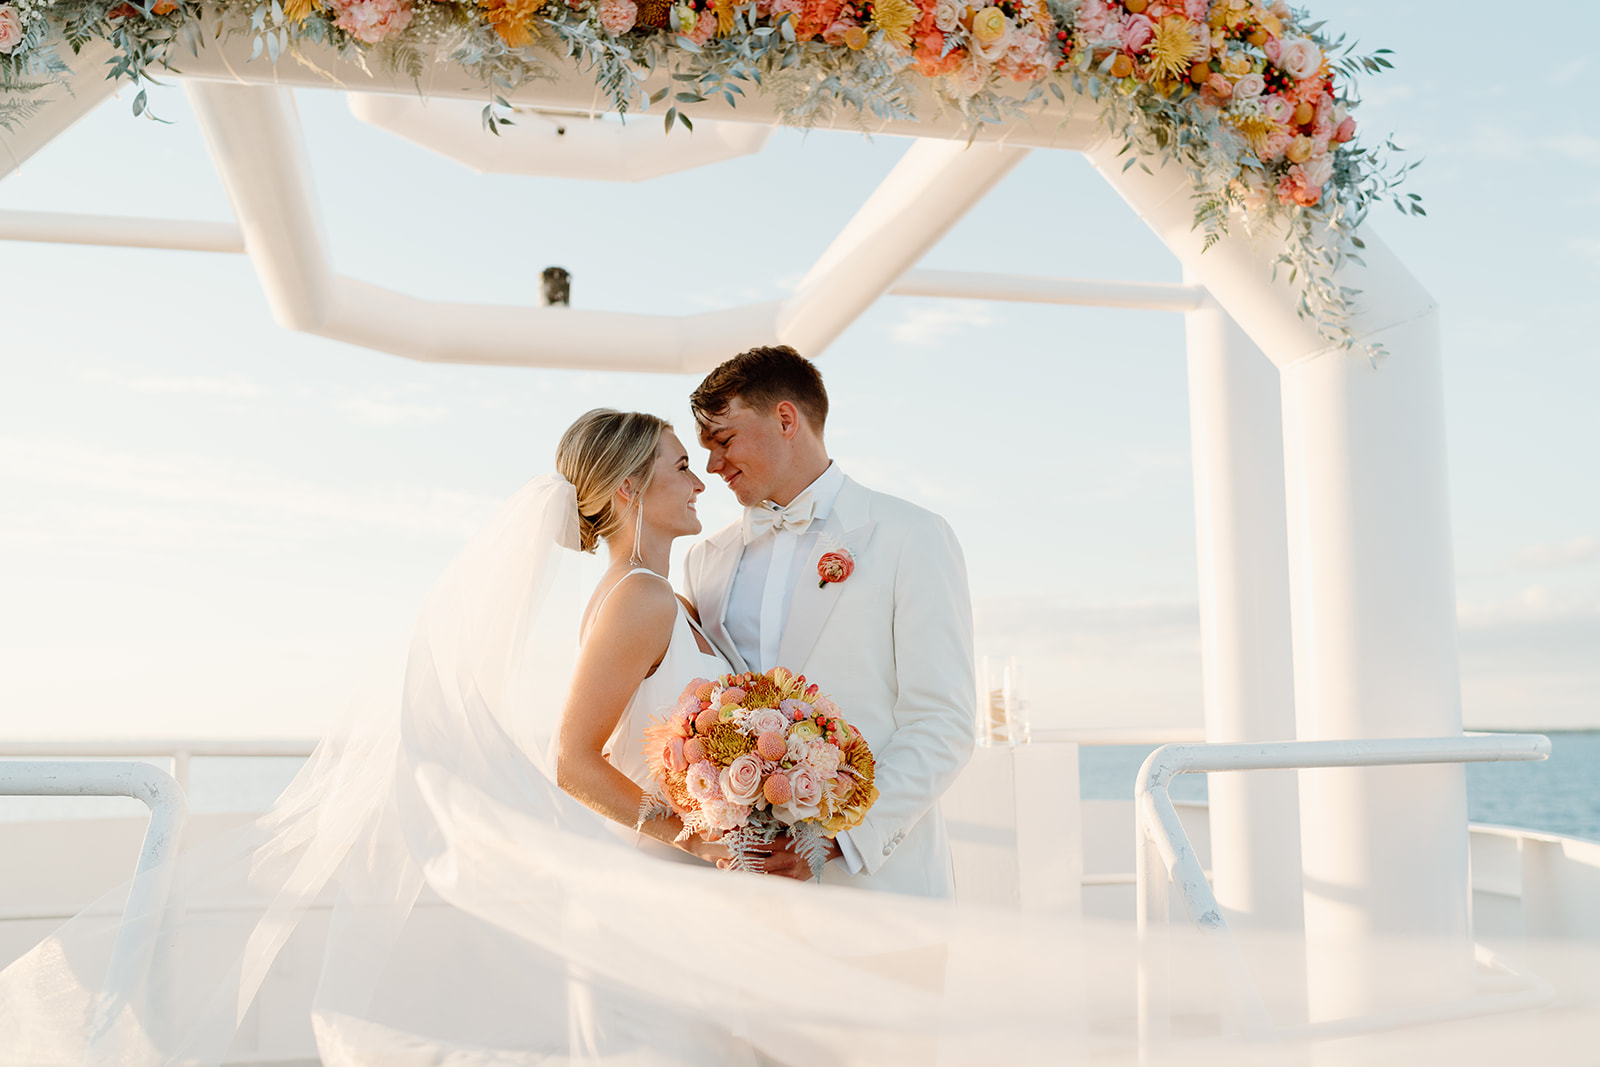 SunQuest Beach Weddings Caters To Couples